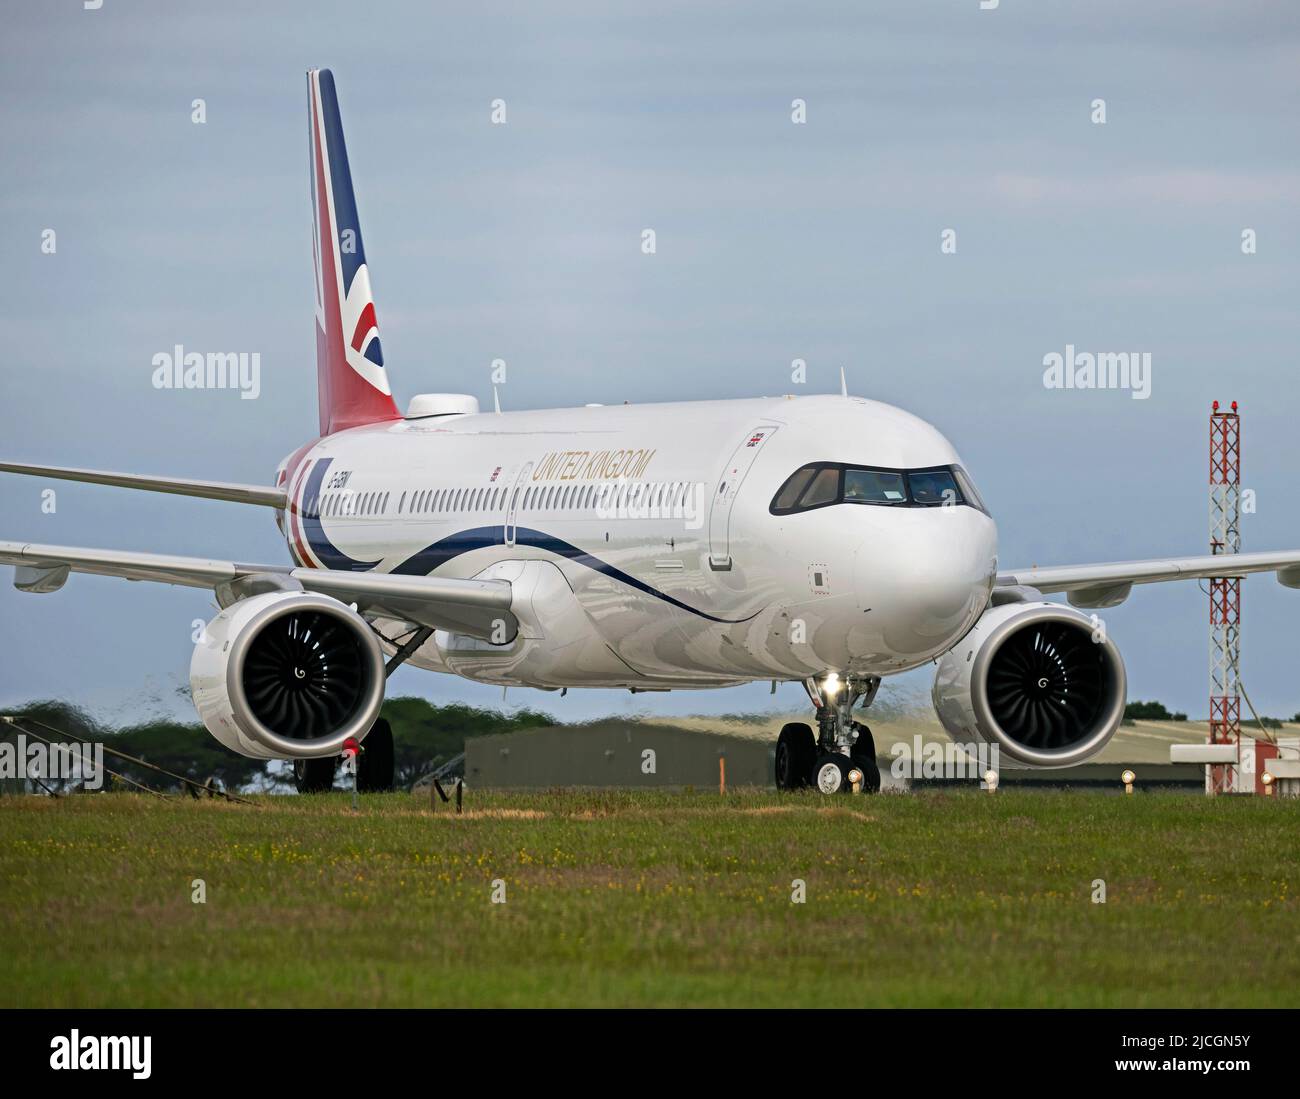 Prime Minister Boris Johnson's transport, an Airbus A321, G-GBNI, arrives at RNAS Culdrose near Helston to collect the Prime Minister after a visit to Southwest Cornwall on 13th April 2022 Stock Photo